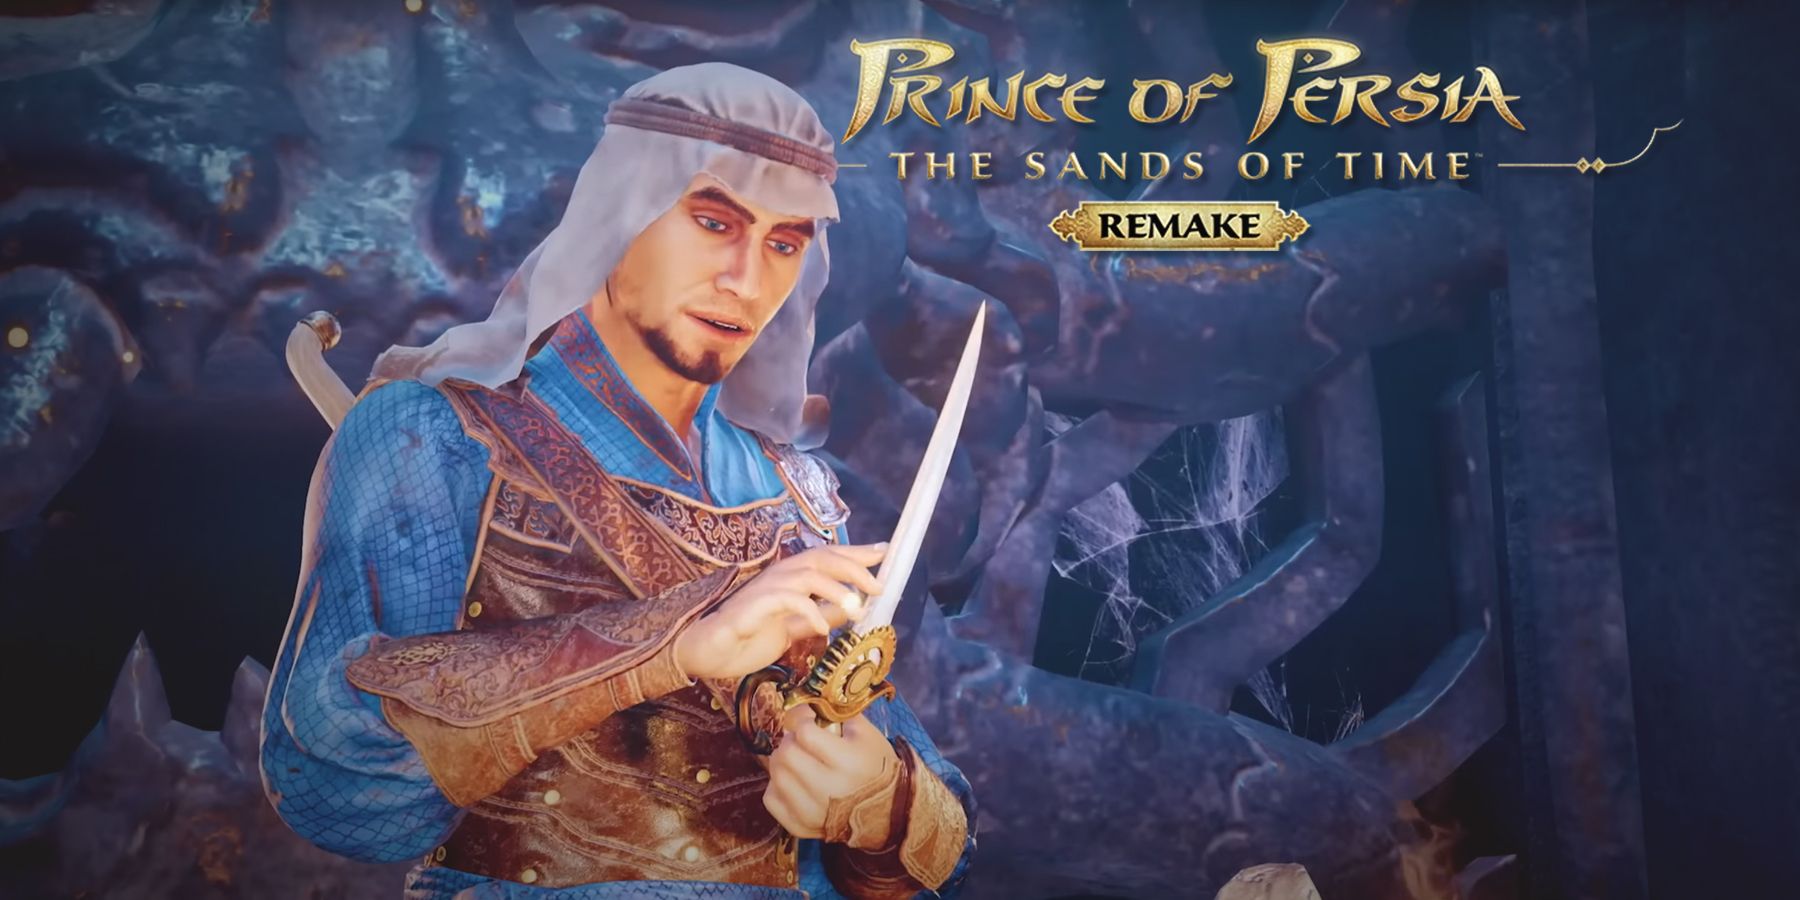 Shinobi602 on X: Prince of Persia: Sands of Time Remake is coming